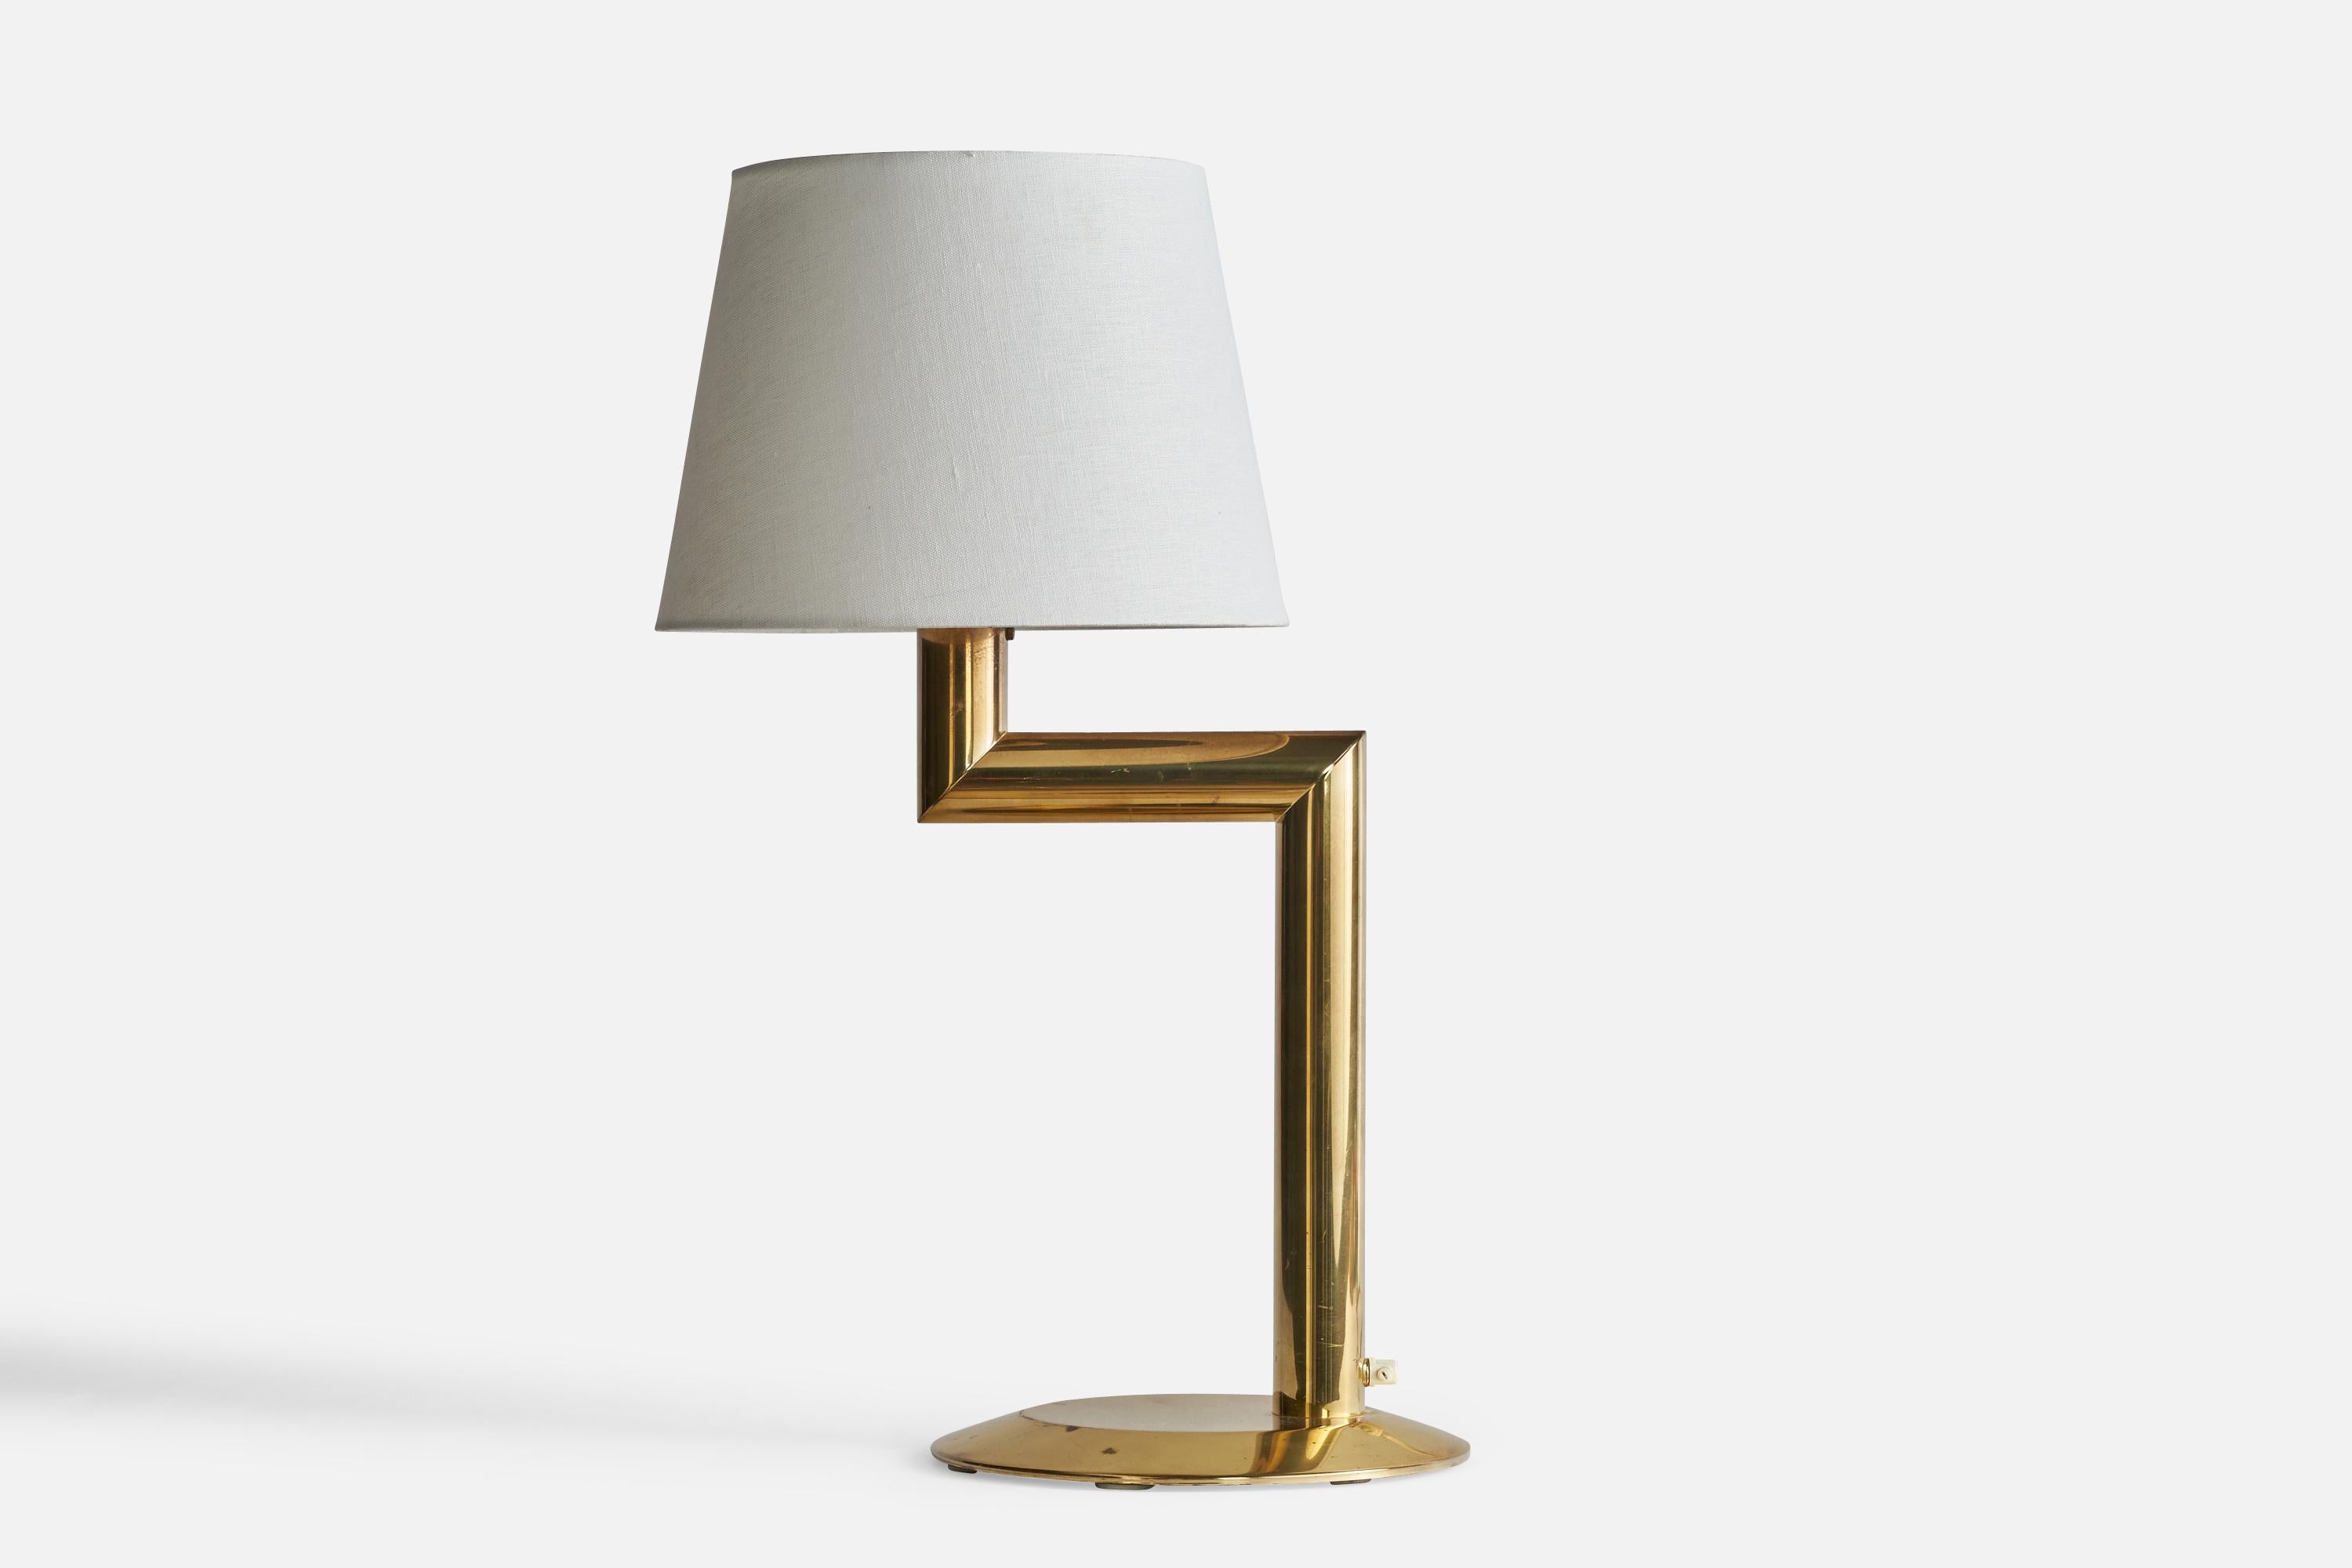 A brass table lamp designed and produced by Öia, Sweden, c. 1970s.

Dimensions of Lamp (inches): 18” H x 10.5” W x 10.5” D
Dimensions of Shade (inches): 9” Top Diameter x 12” Bottom Diameter x 9” H
Dimensions of Lamp with Shade (inches): 24.75” H x